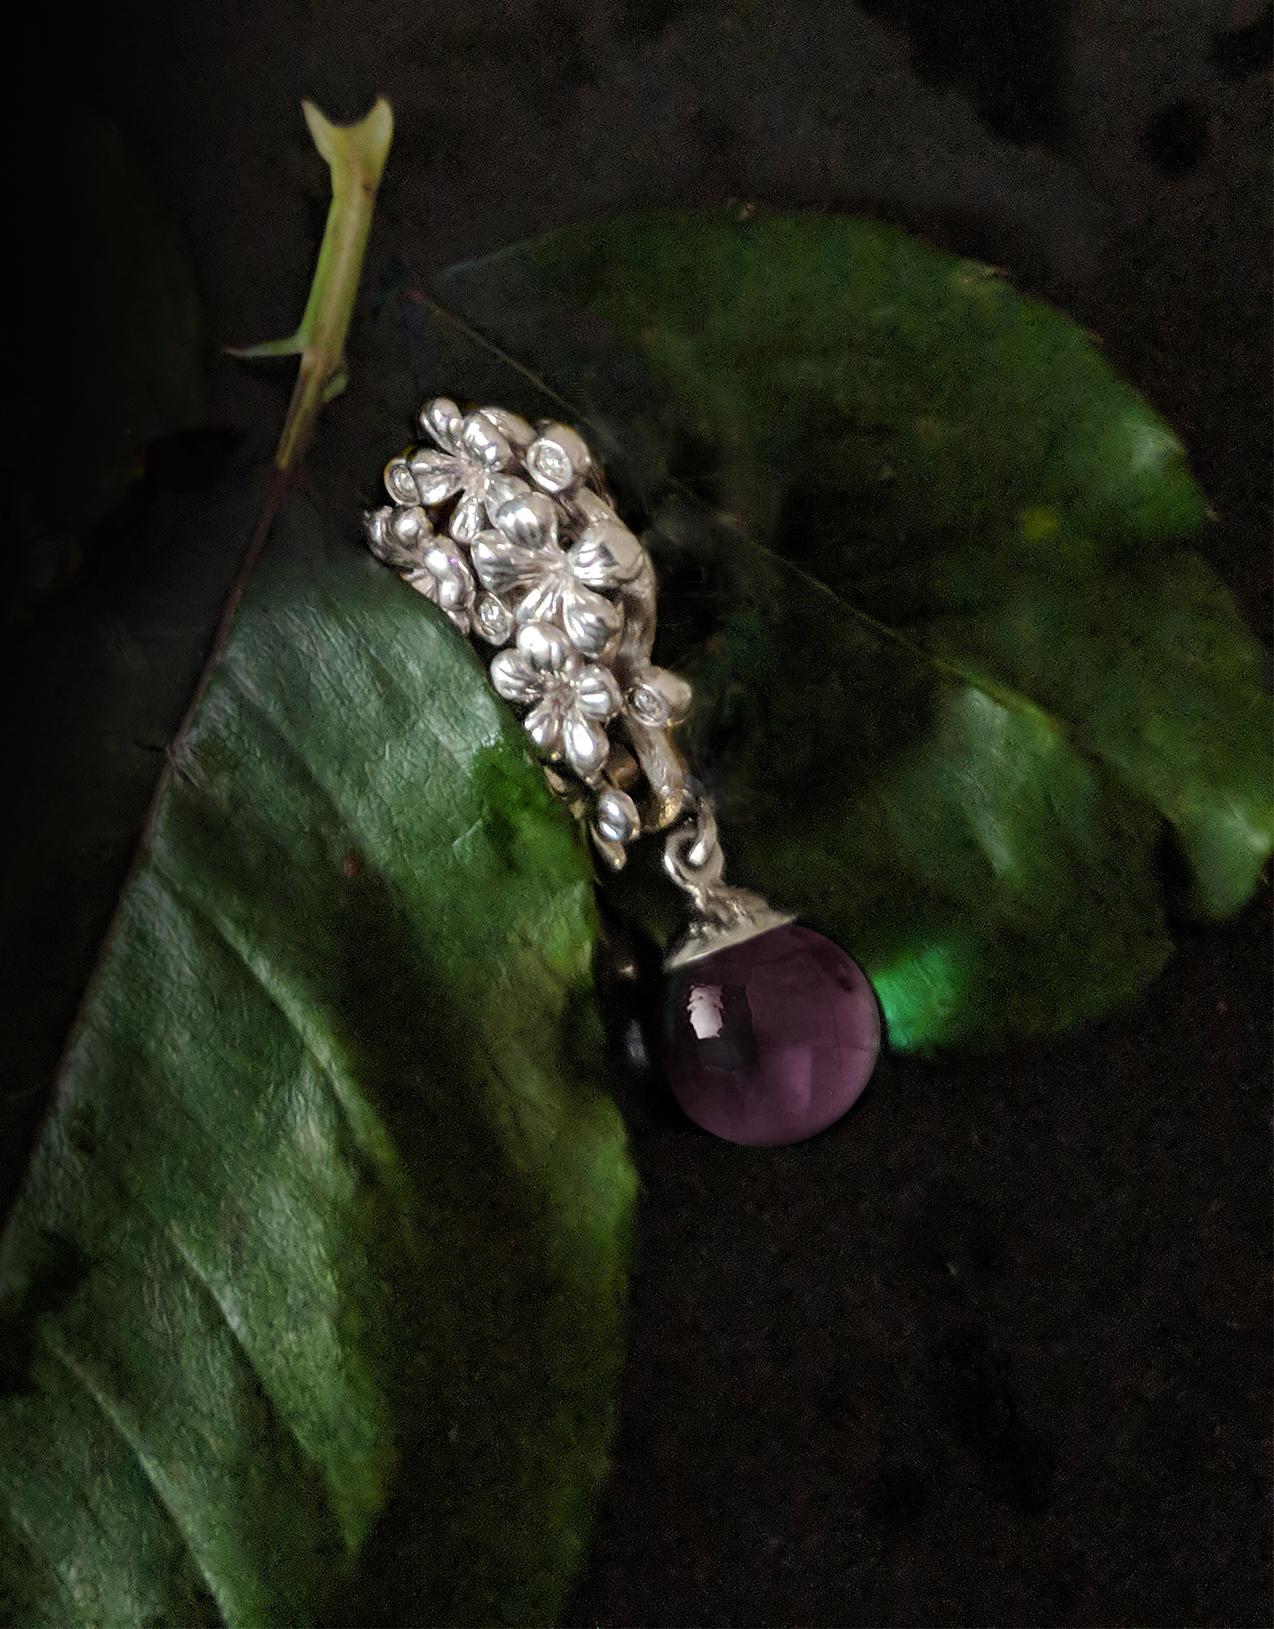 18 karat white gold Plum Blossom brooch encrusted with a rose quartz cabochon and five round diamonds. This contemporary jewellery collection has been featured in Vogue UA. We use top-quality natural diamonds, VS clarity and F-G color, and work with